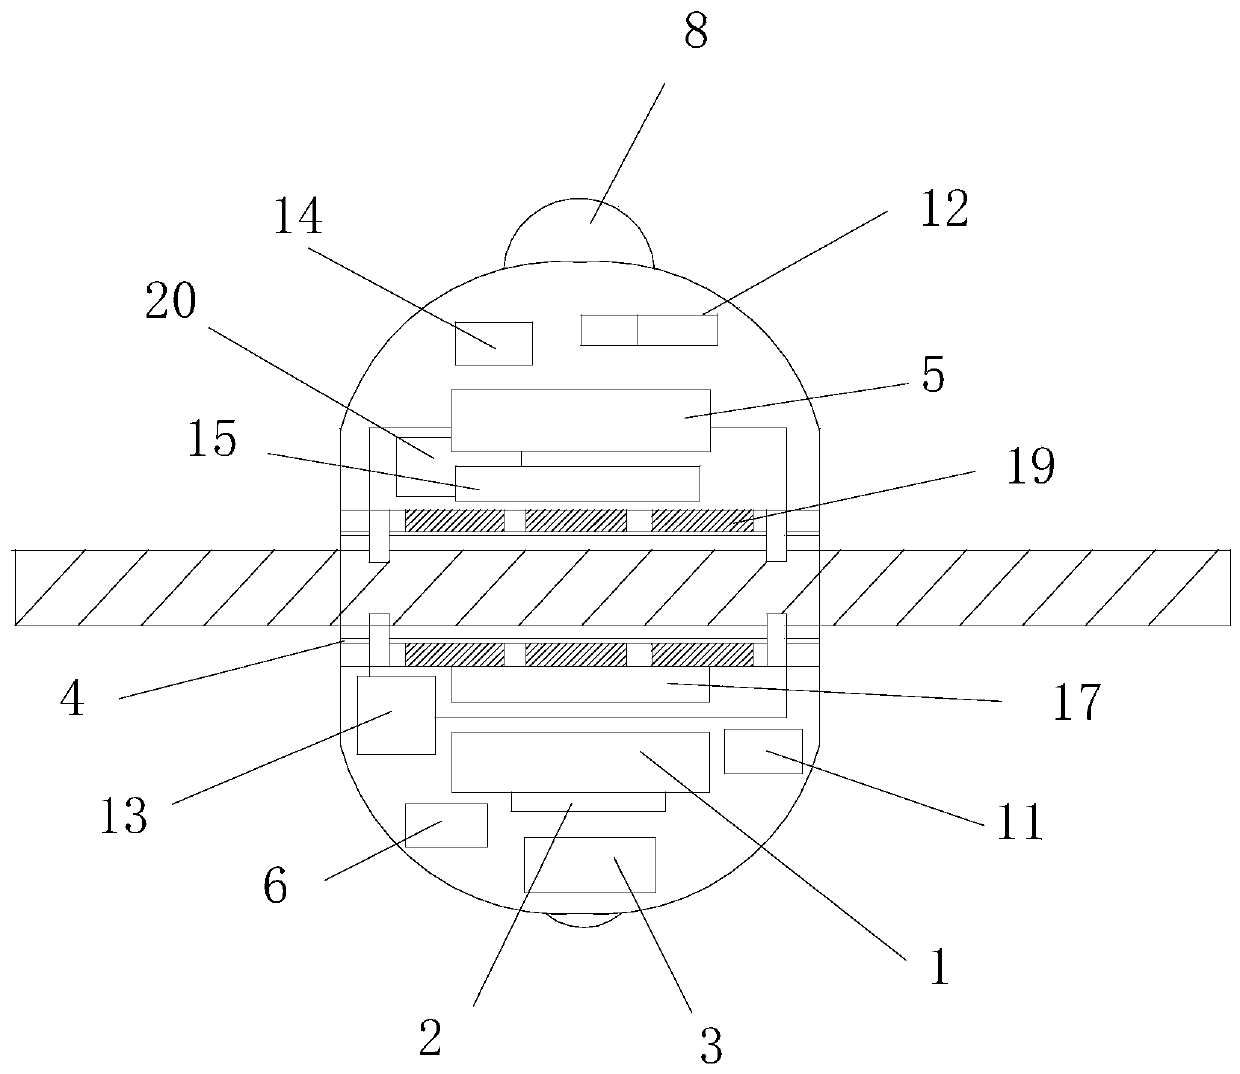 Suspended overhead transmission line online monitoring system and method